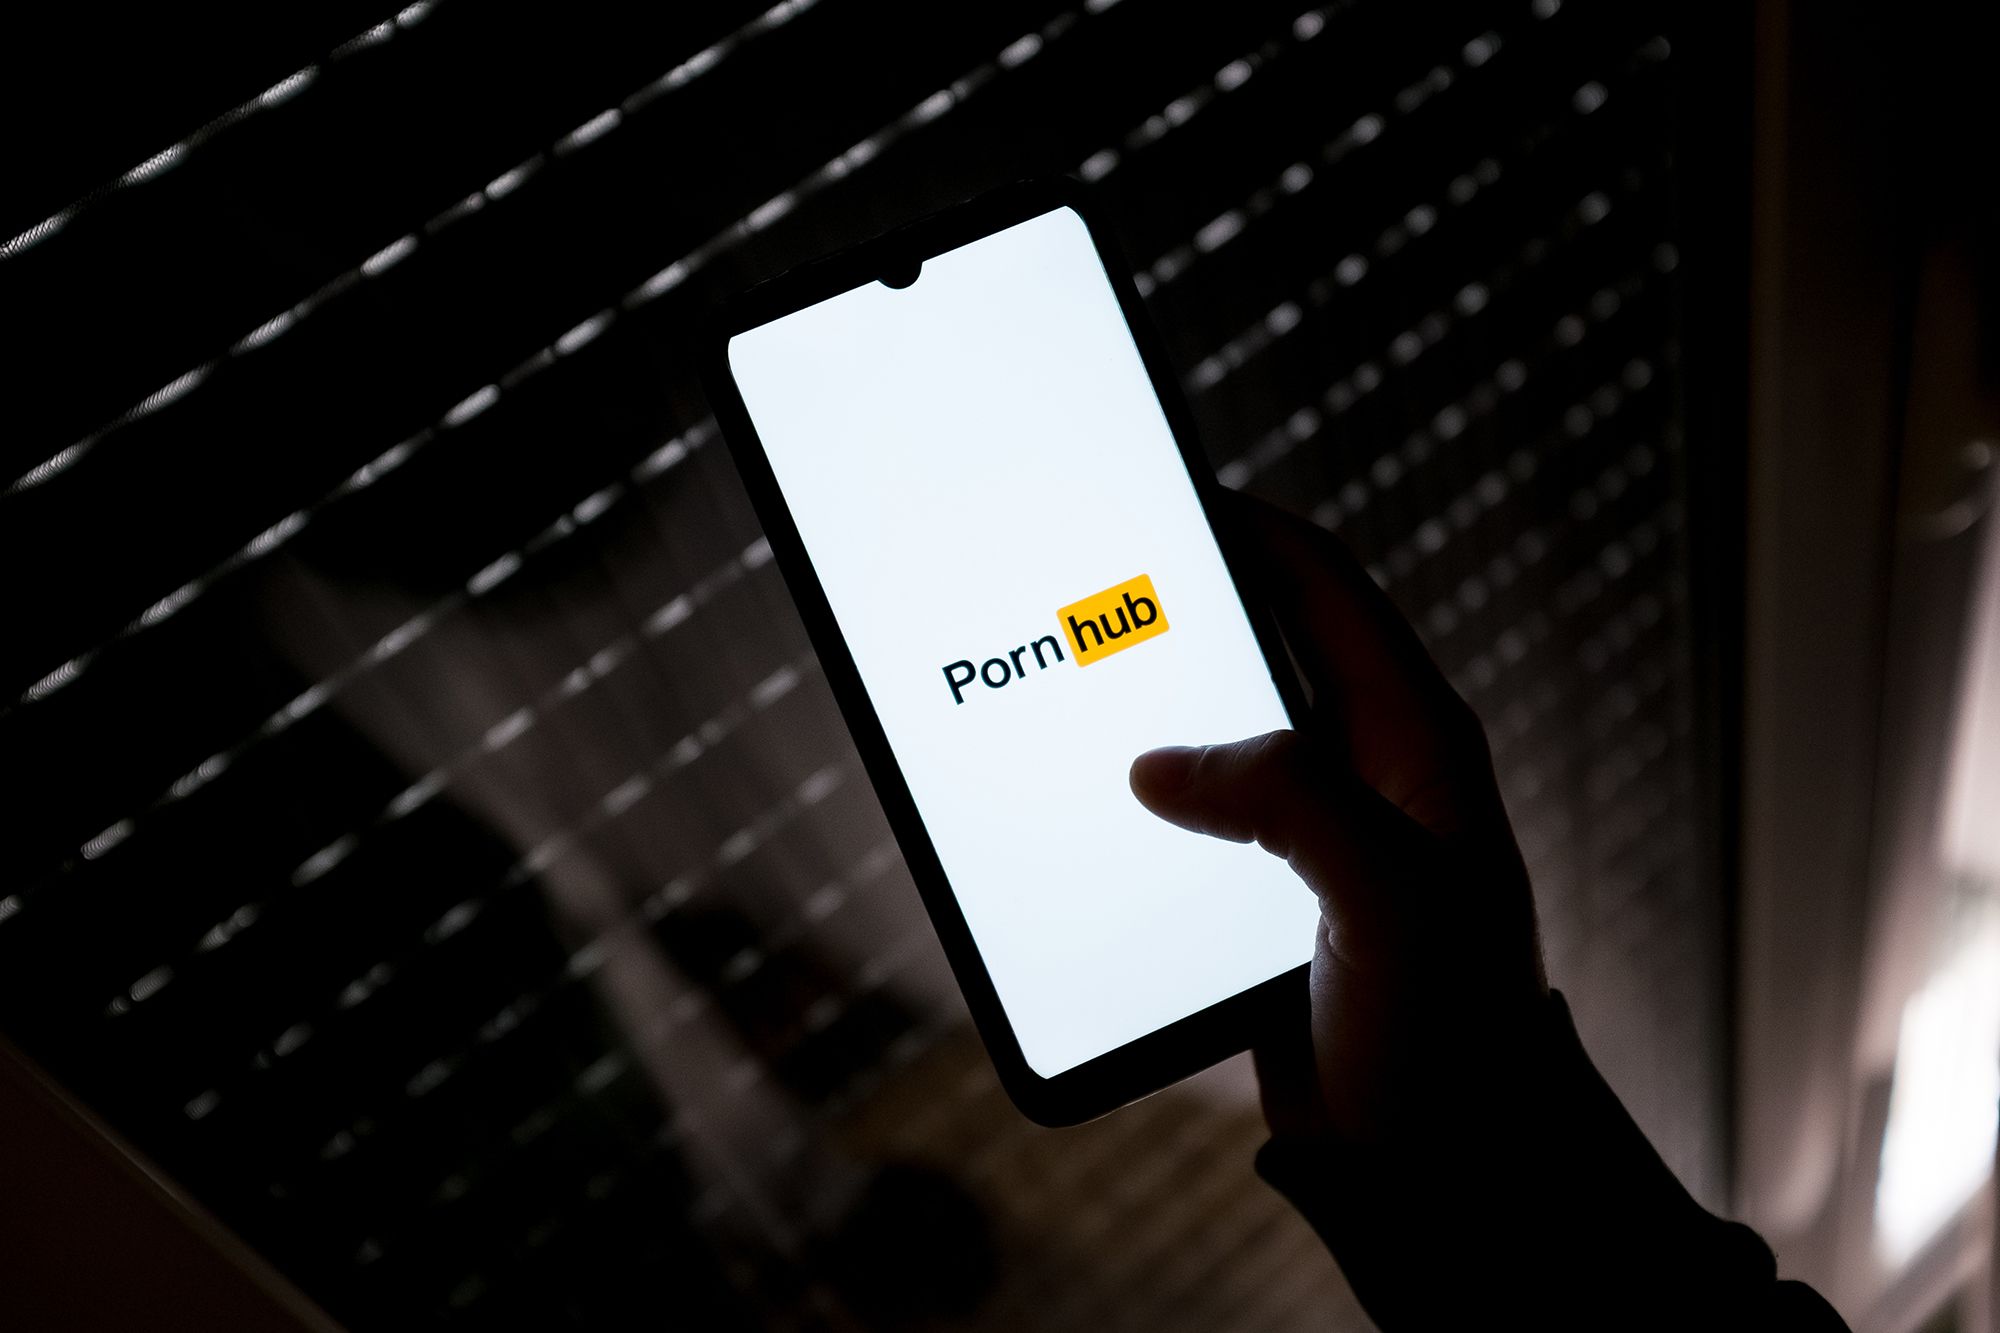 Uporn Vedio - Pornhub asks users, Big Tech for help as states adopt age verification laws  | CNN Business